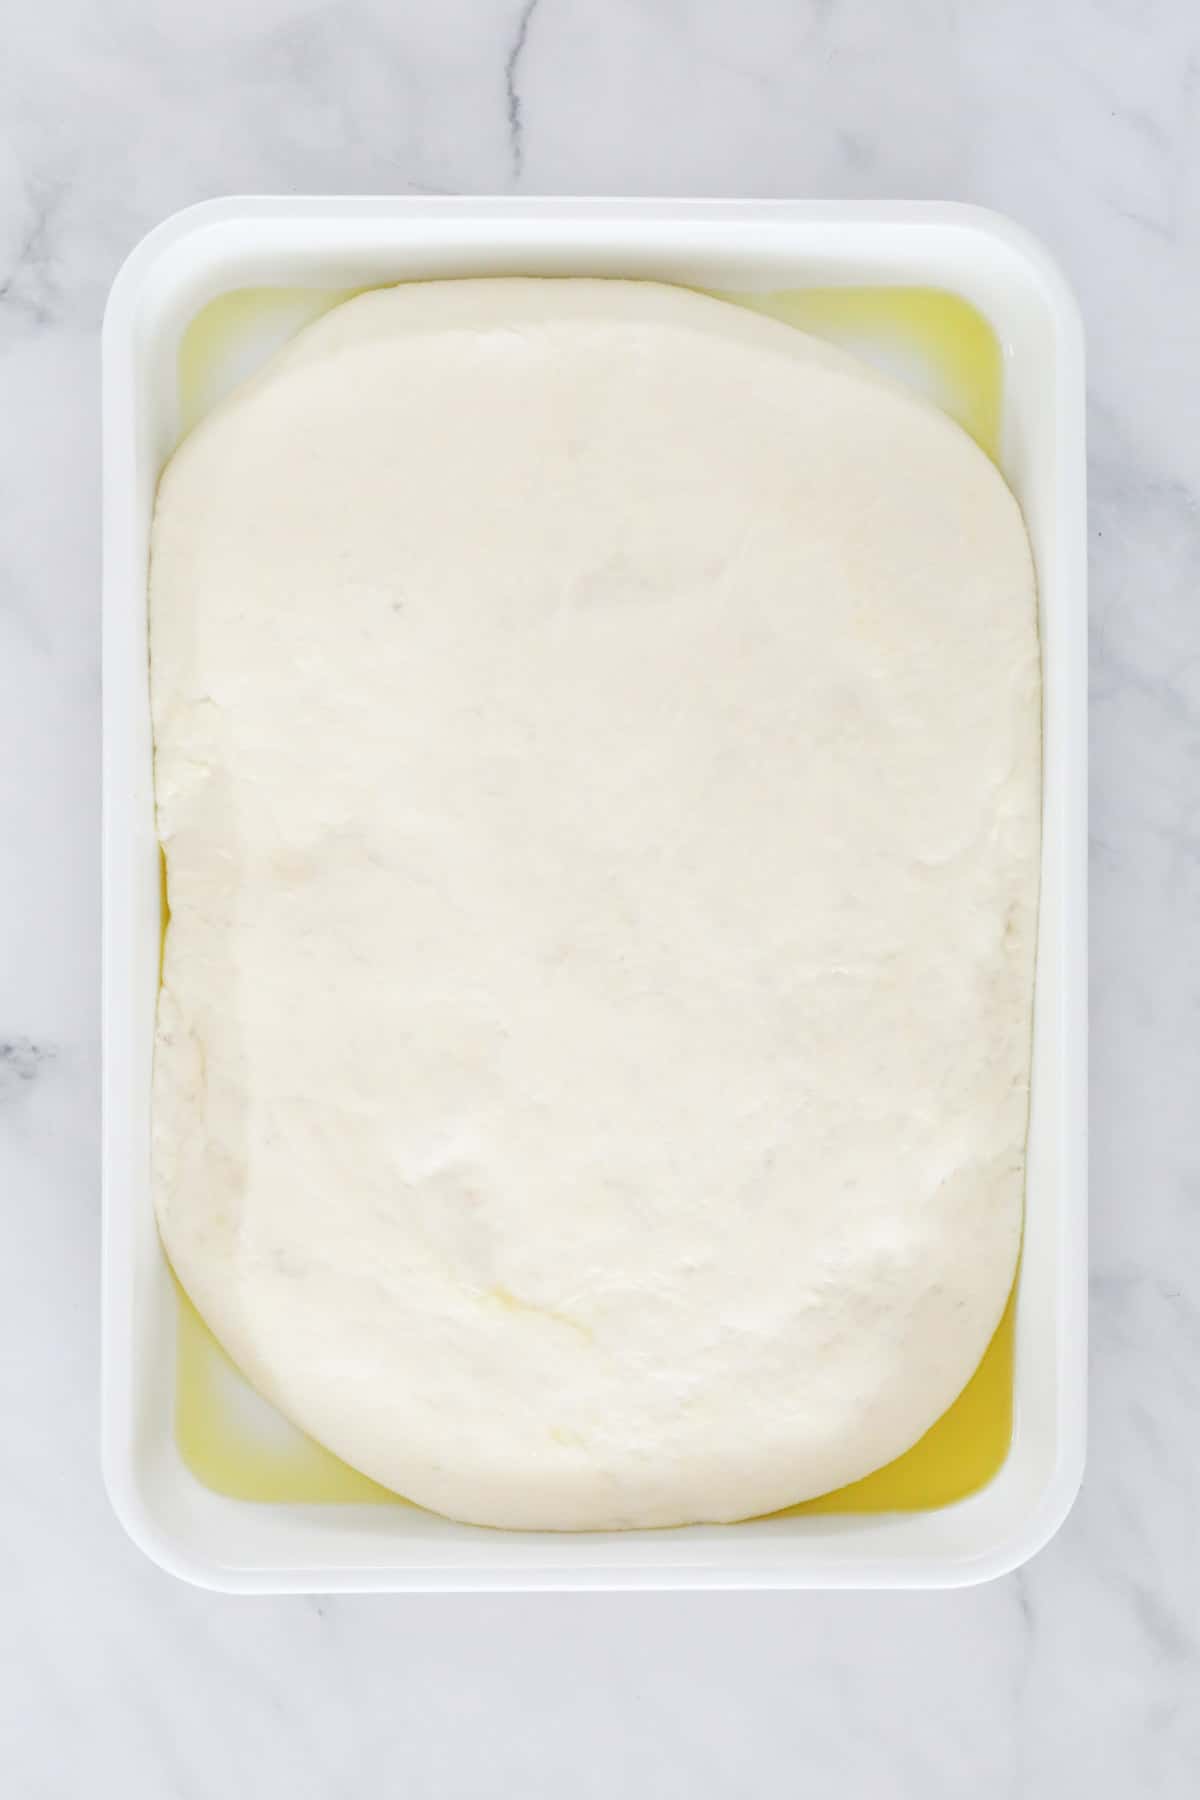 Dough in a white dish with oil in the base.